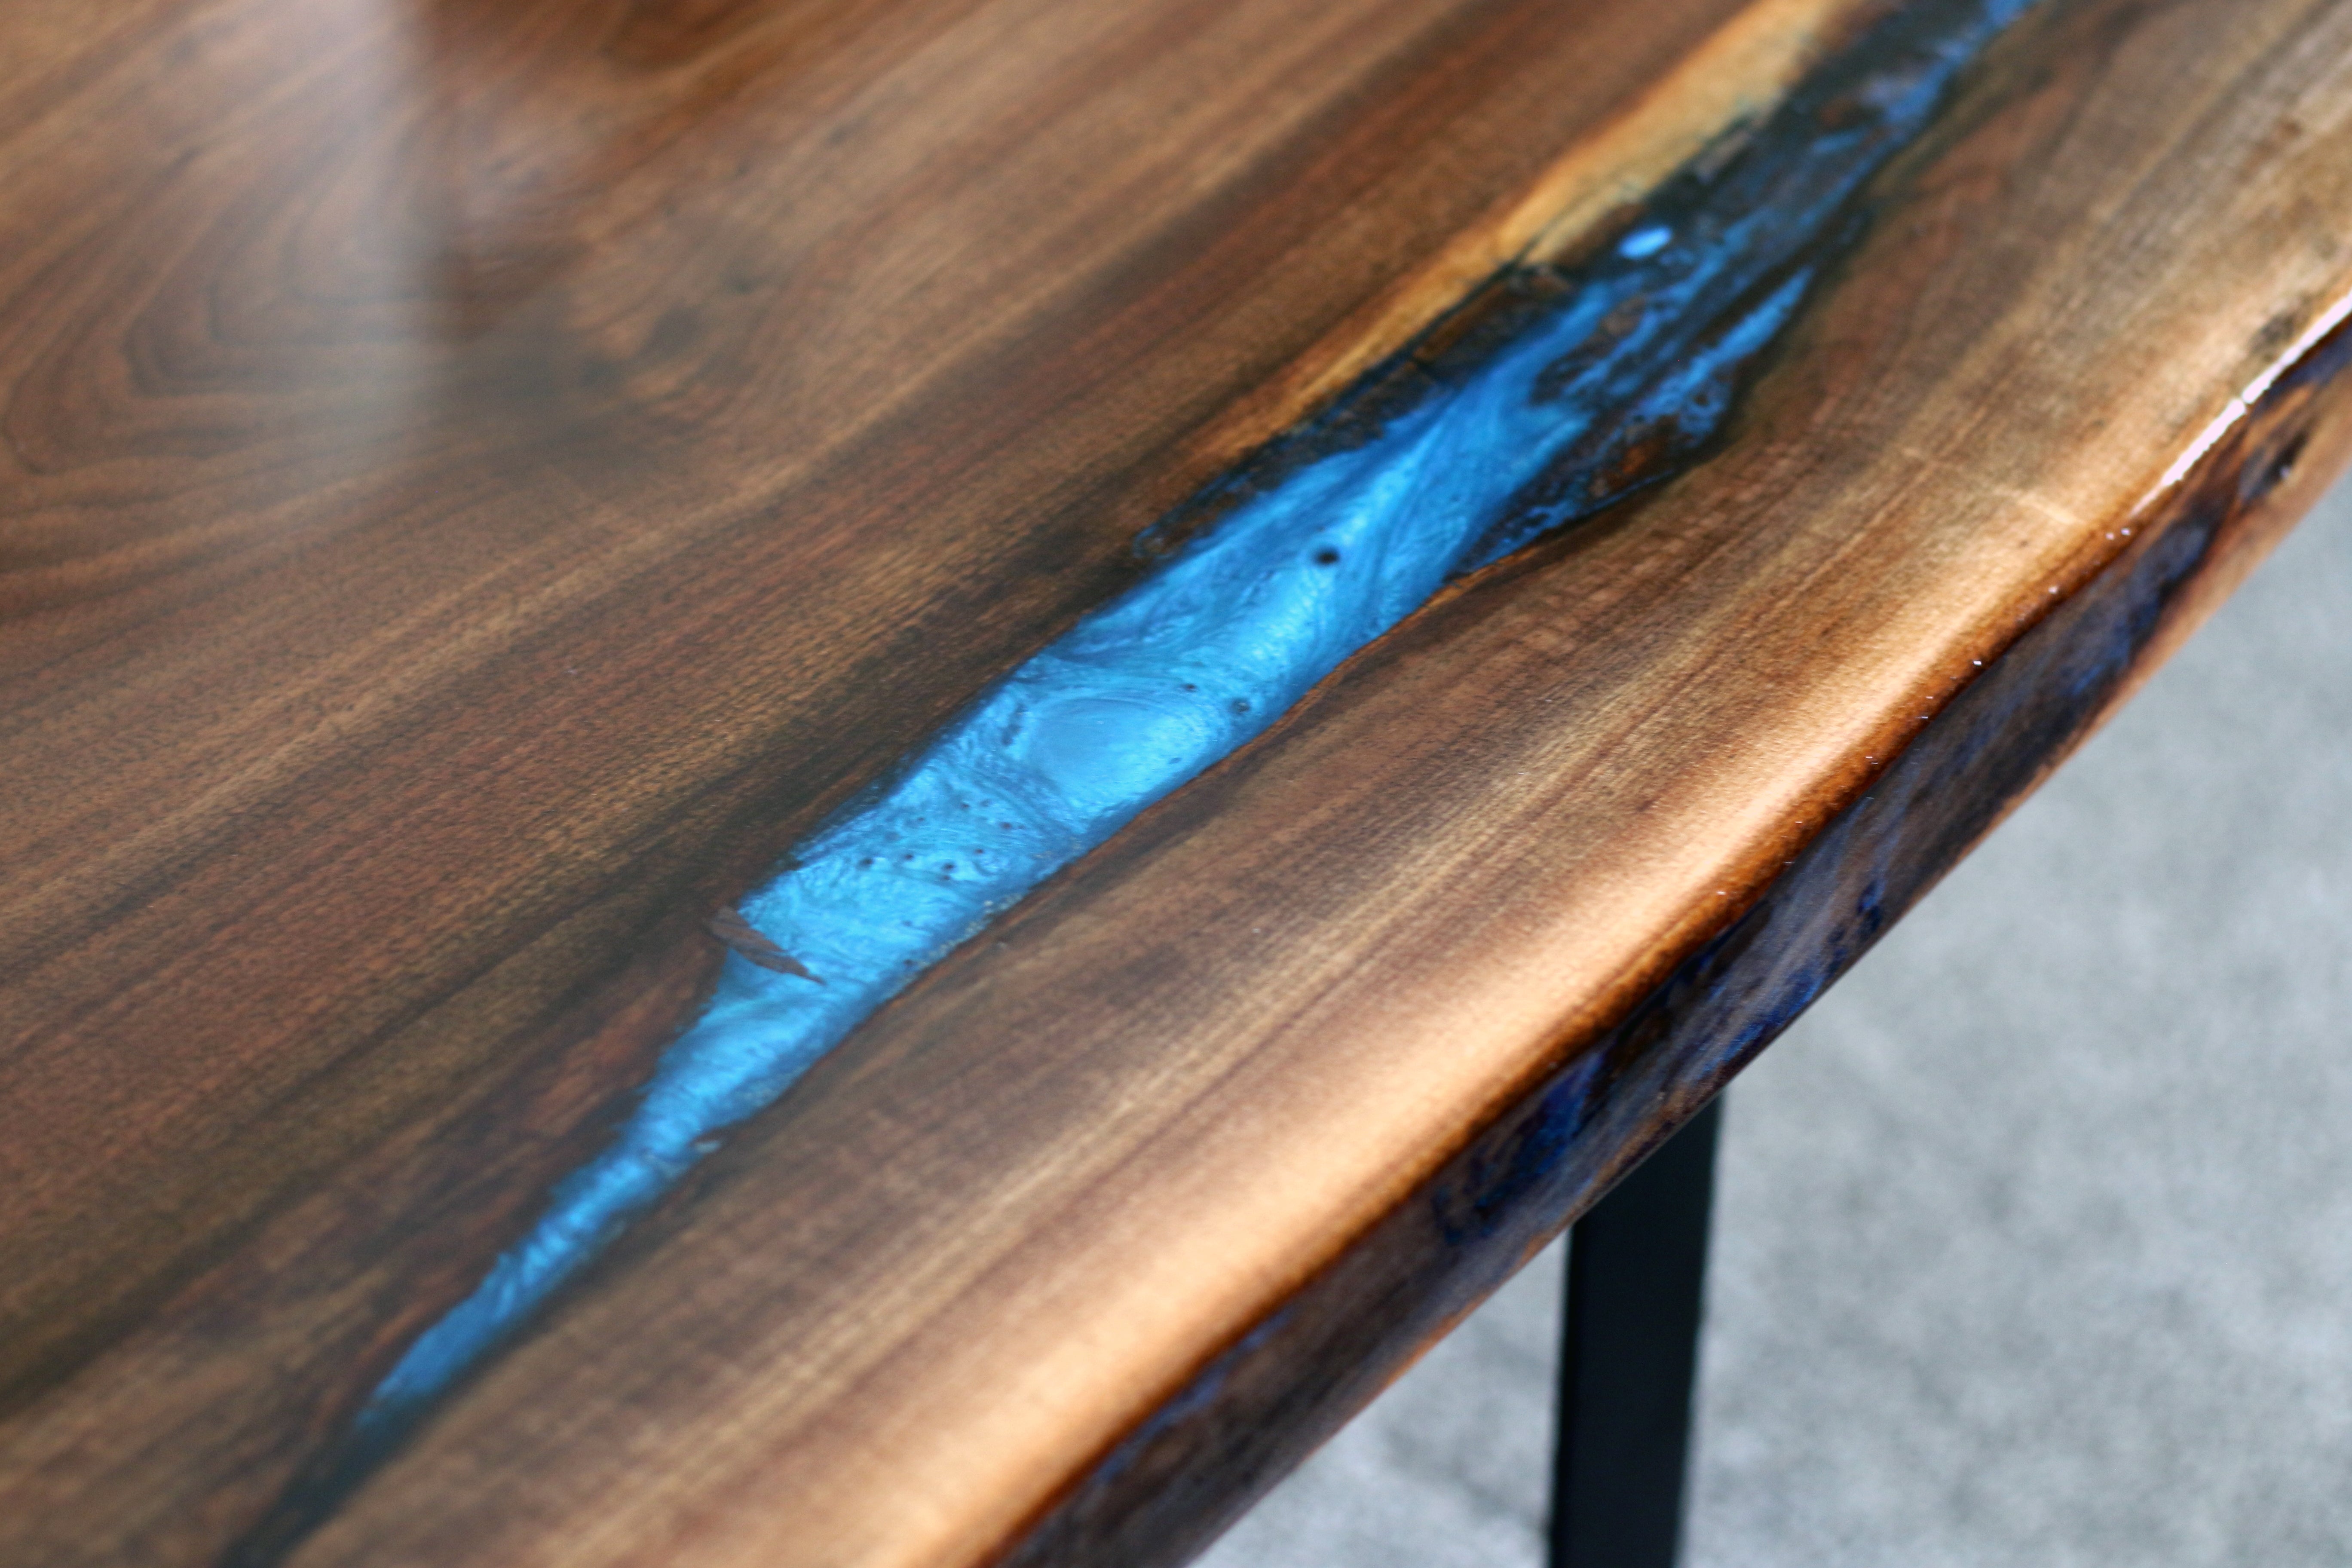 what should i use to fill the cracks/gaps on this table top? epoxy